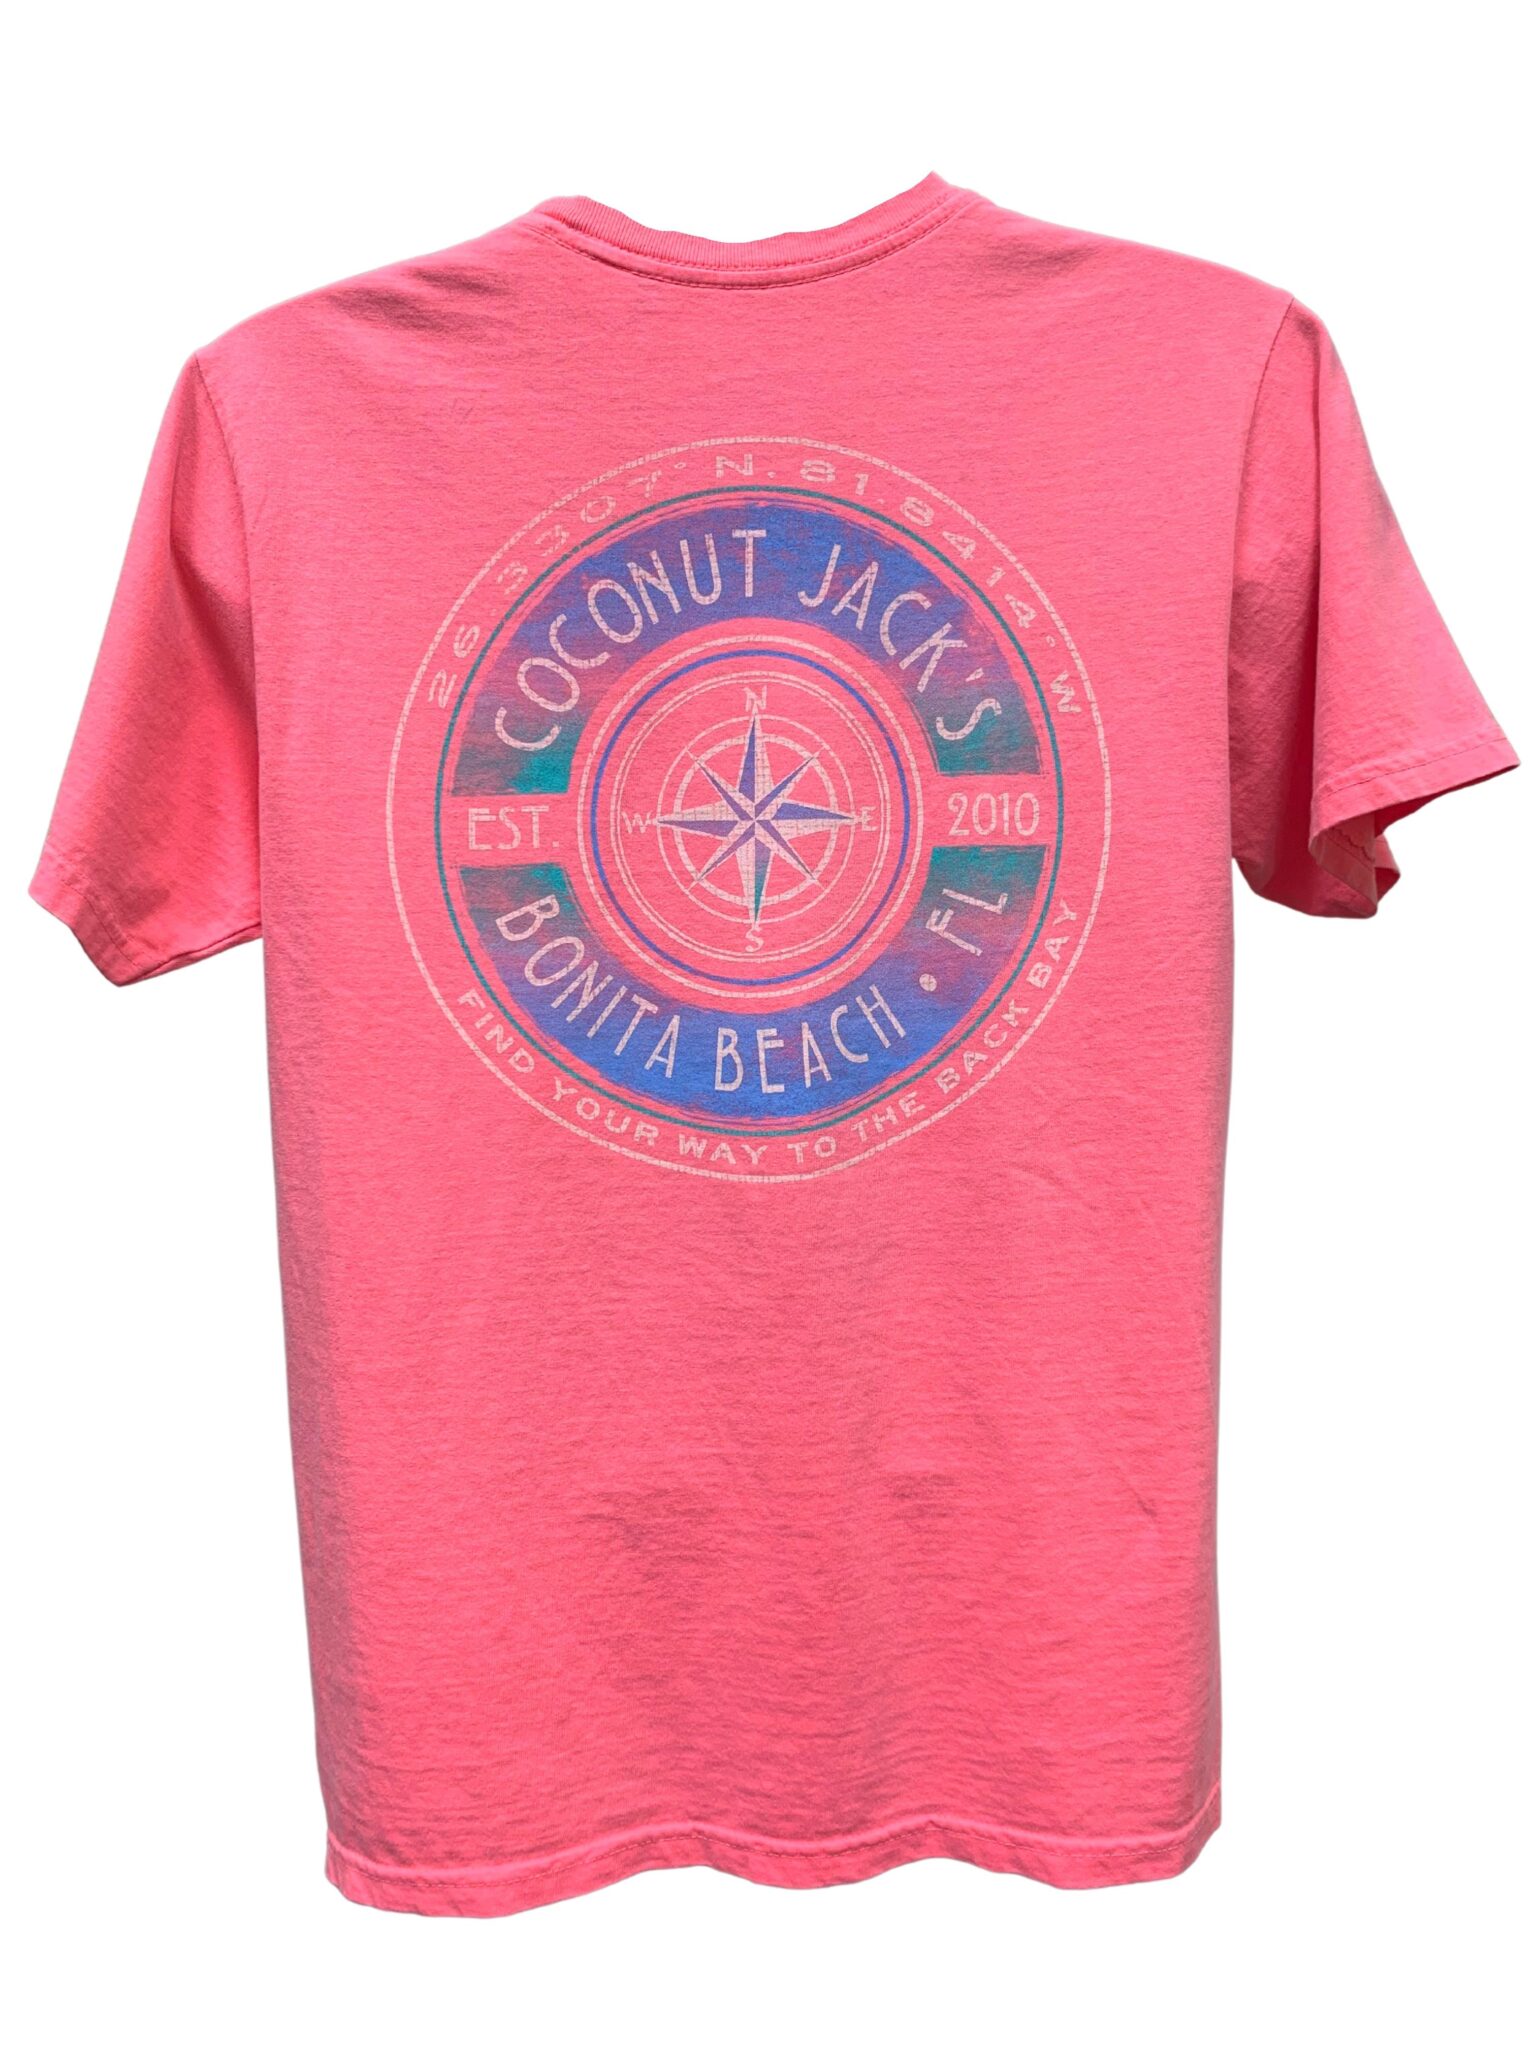 Coconut Jack’s Coral Compass Tee - Coconut Jack's Waterfront Grille